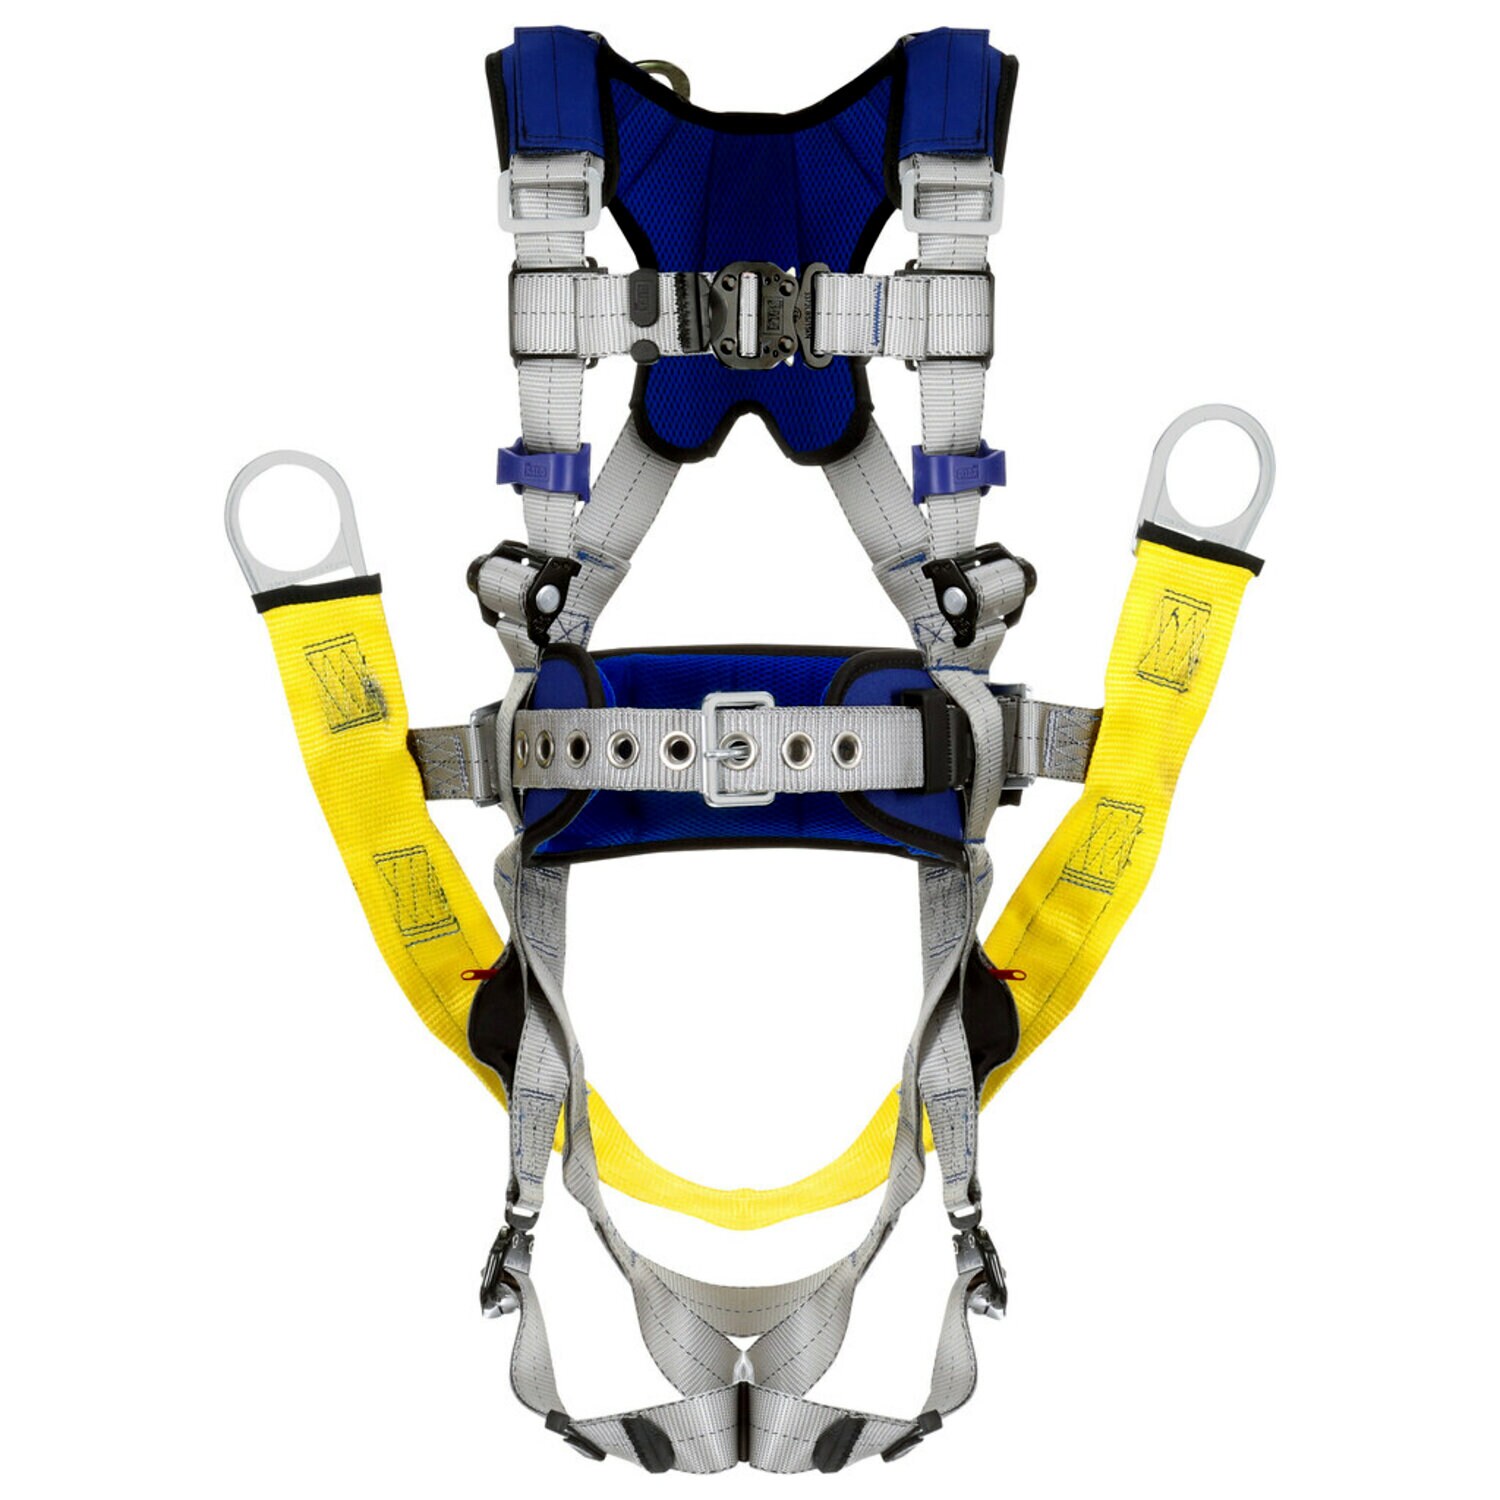 7012817690 - 3M DBI-SALA ExoFit X100 Comfort Oil & Gas Climbing/Suspension Safety Harness 1401207, Large, Energy Absorber Extension